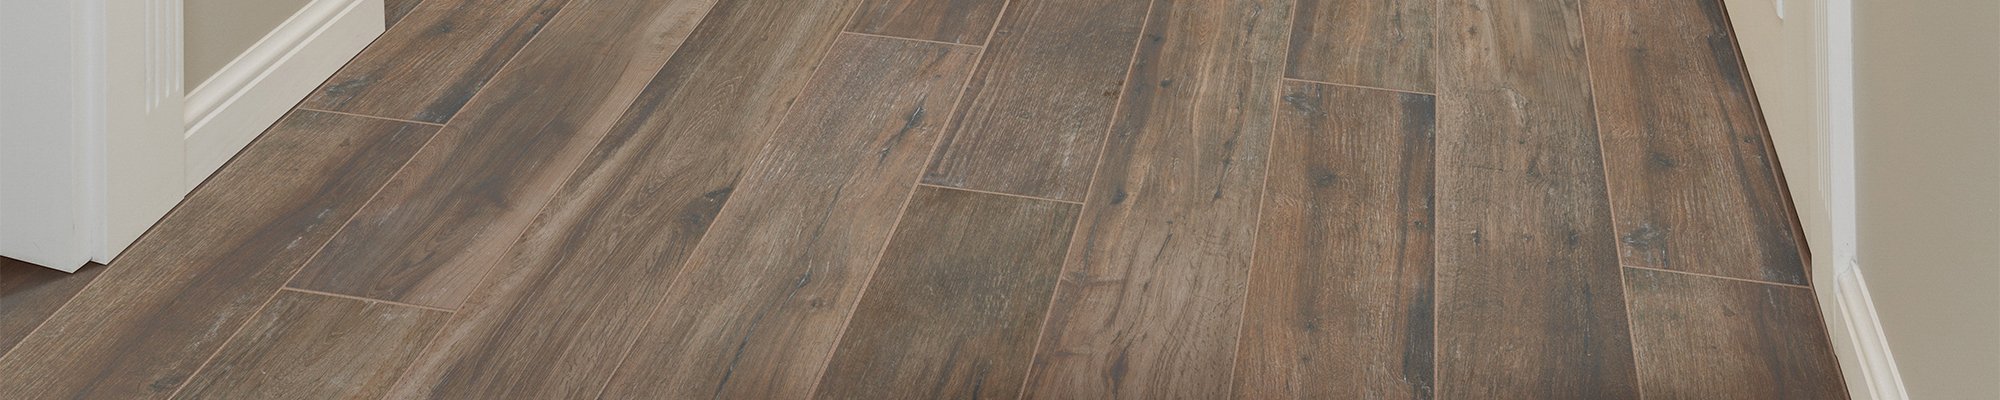 Floors USA has hundreds of in-stock styles of tile in a variety of materials, finishes and colors.